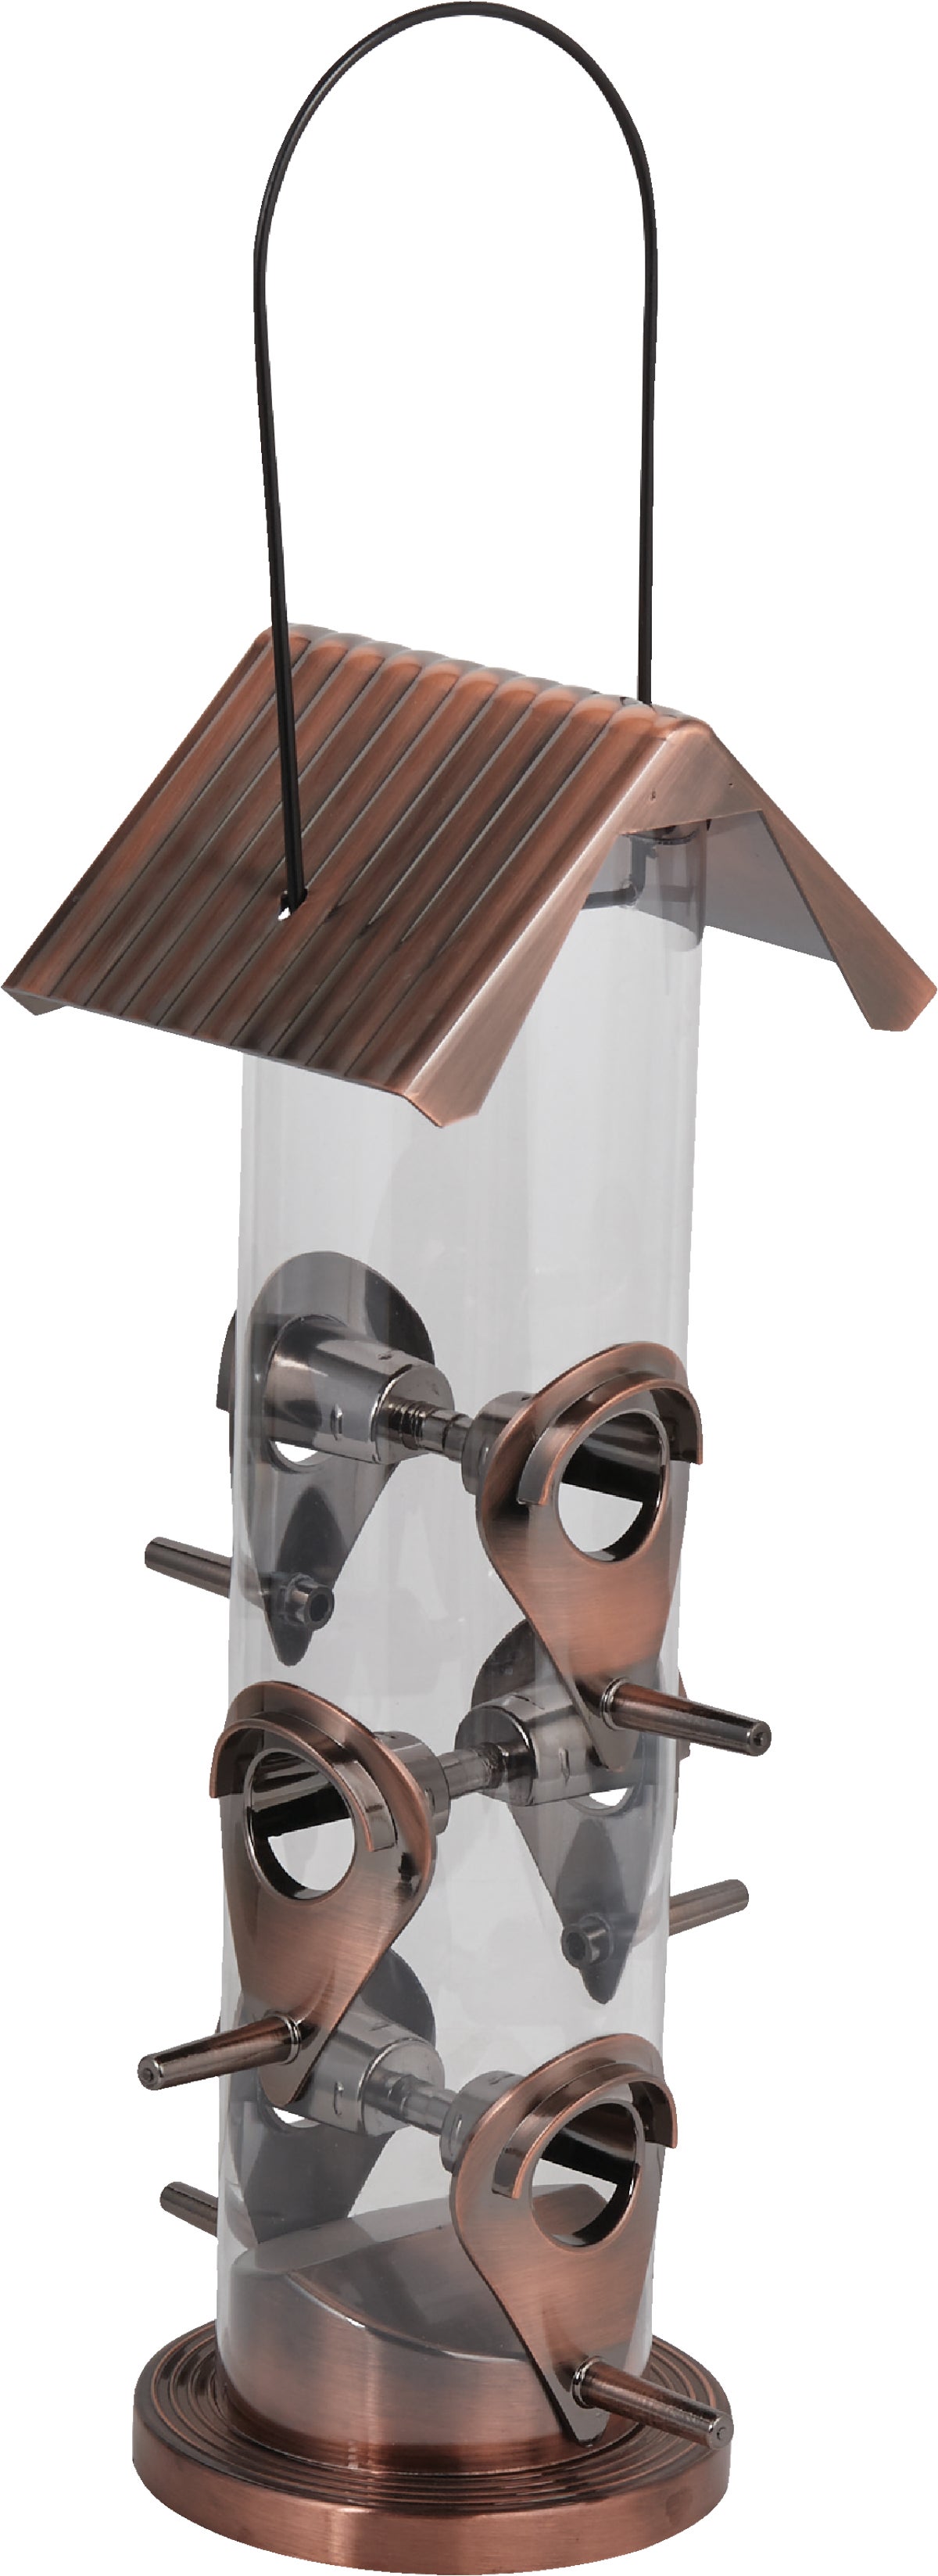 Moultrie Feed Station Bird Feeder for sale online 